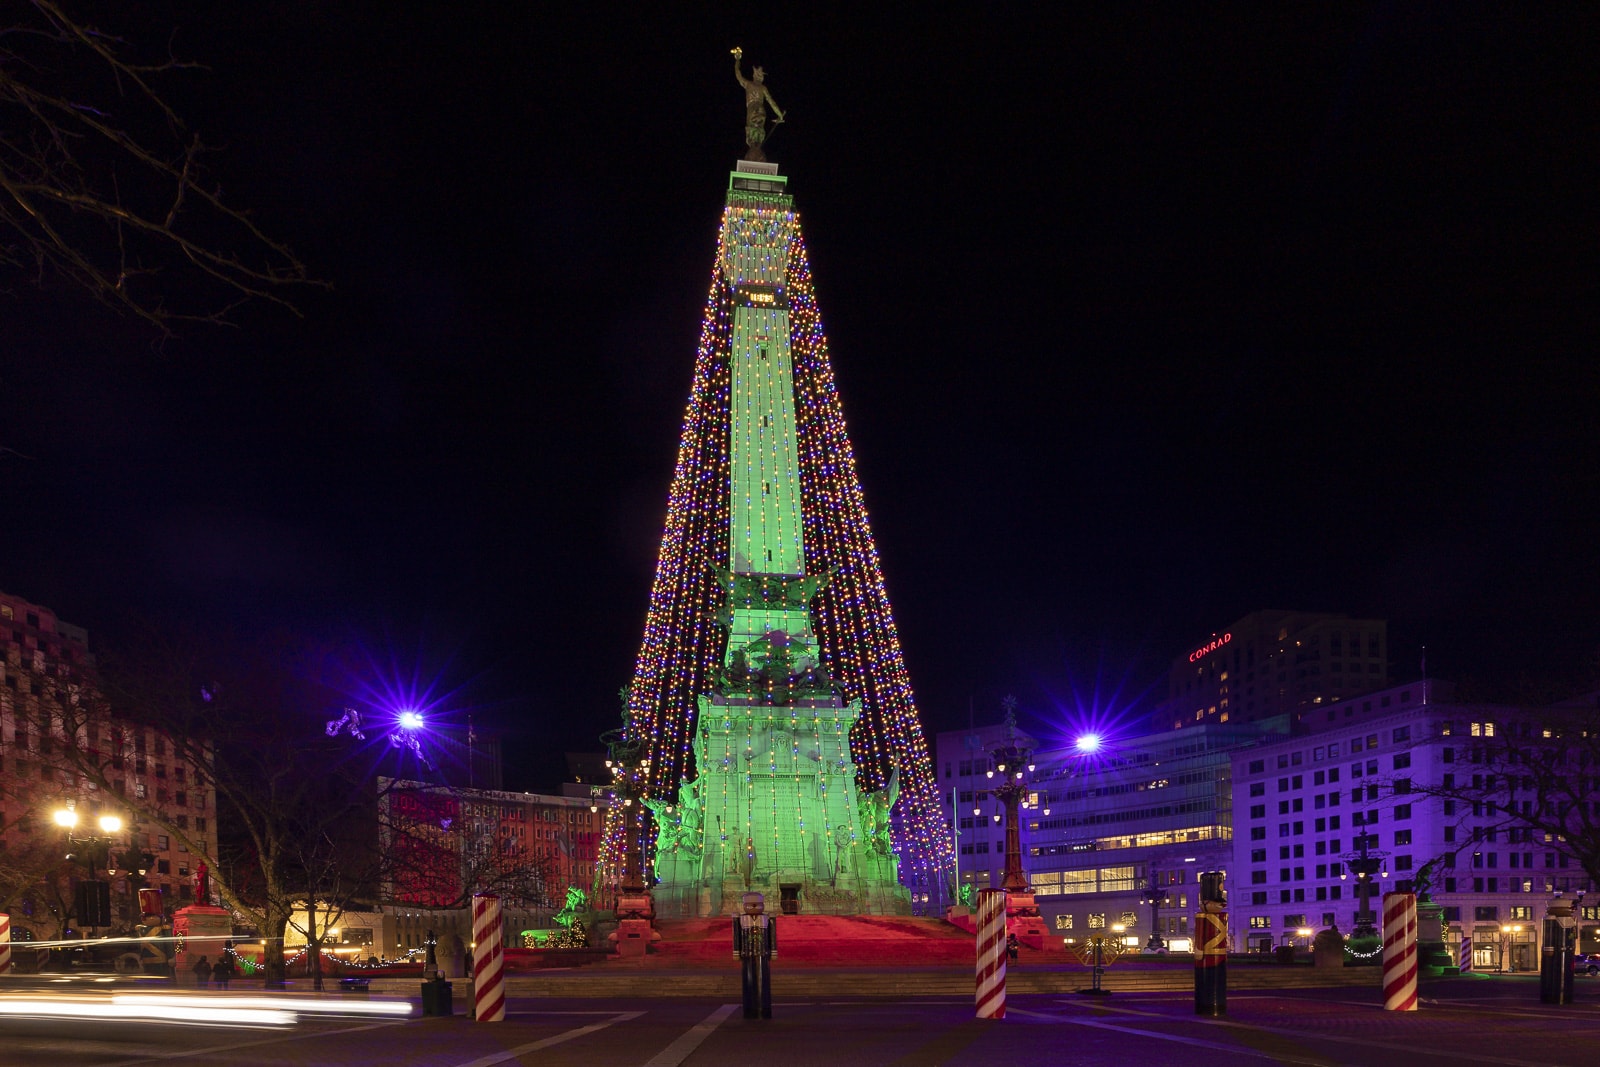 Indianapolis World's Largest Christmas Tree at Night